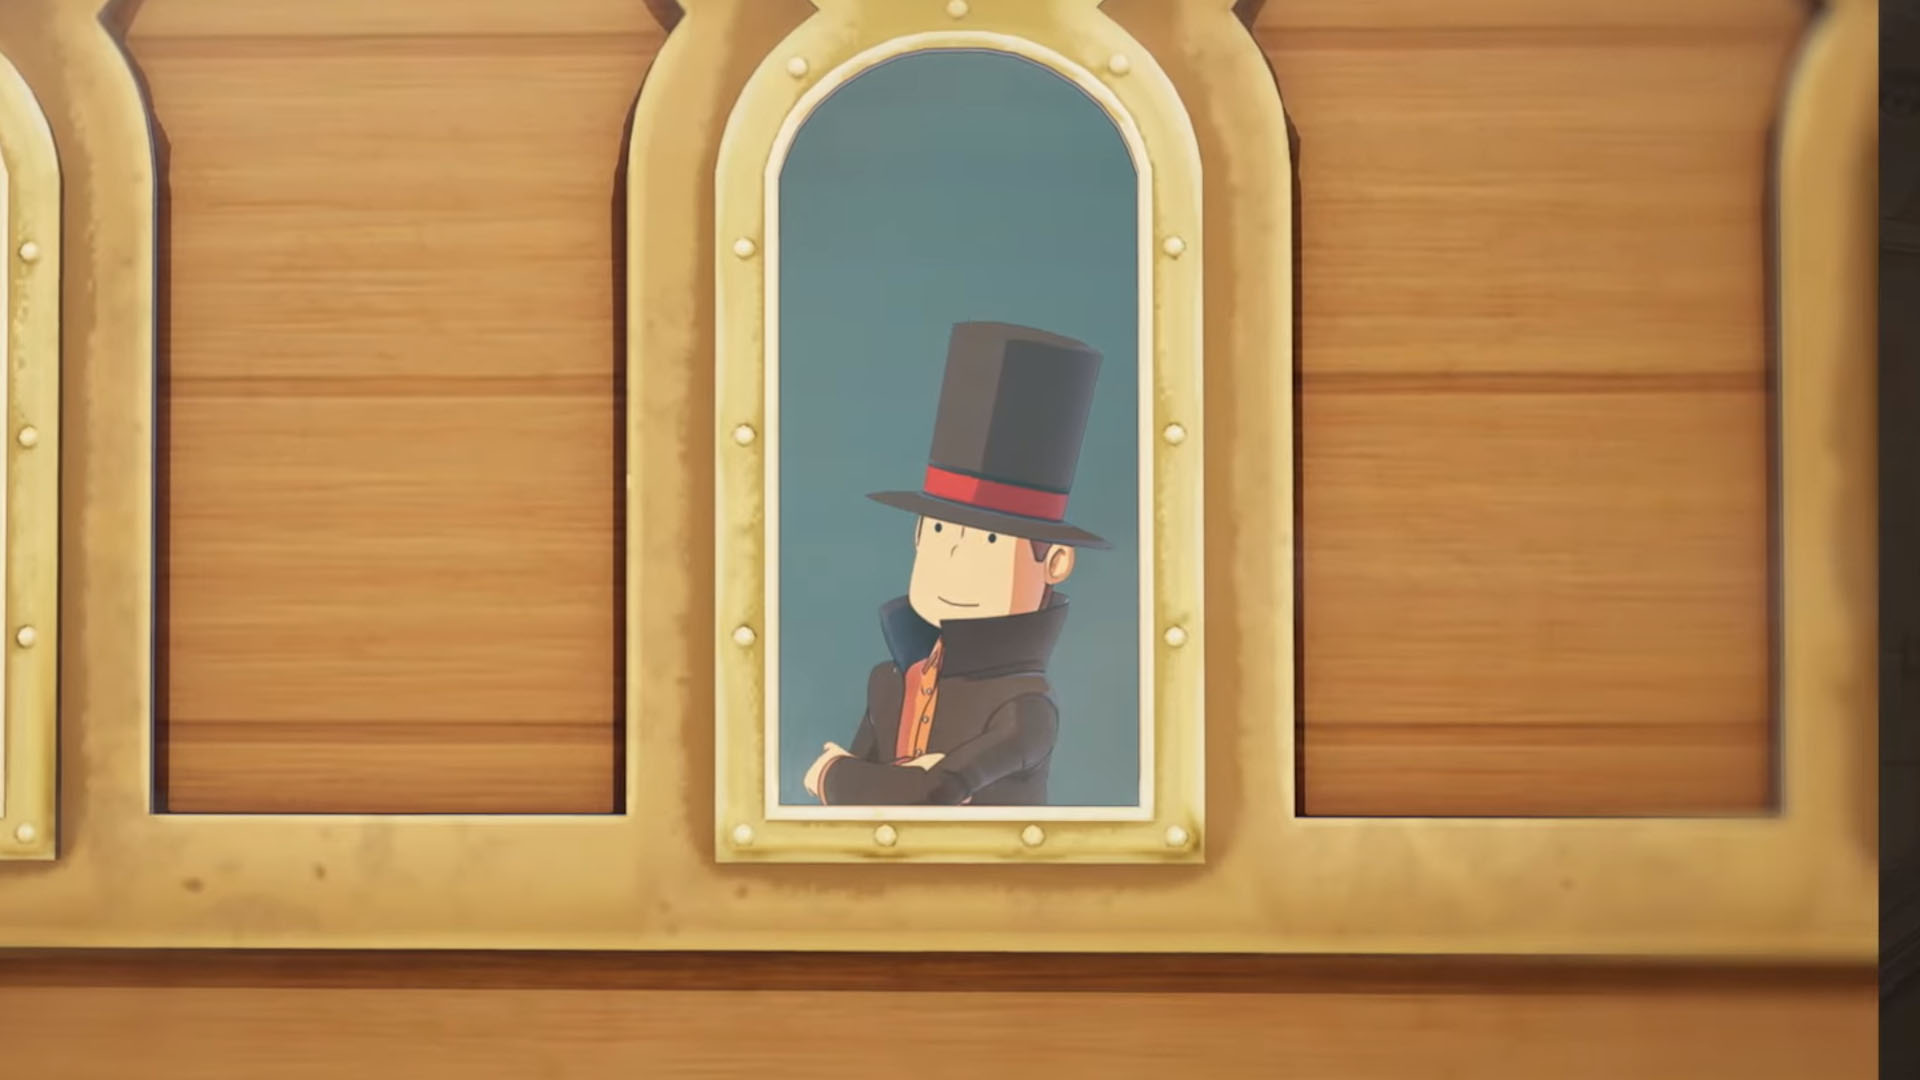 Professor Layton and The New World of Steam details its long-awaited story